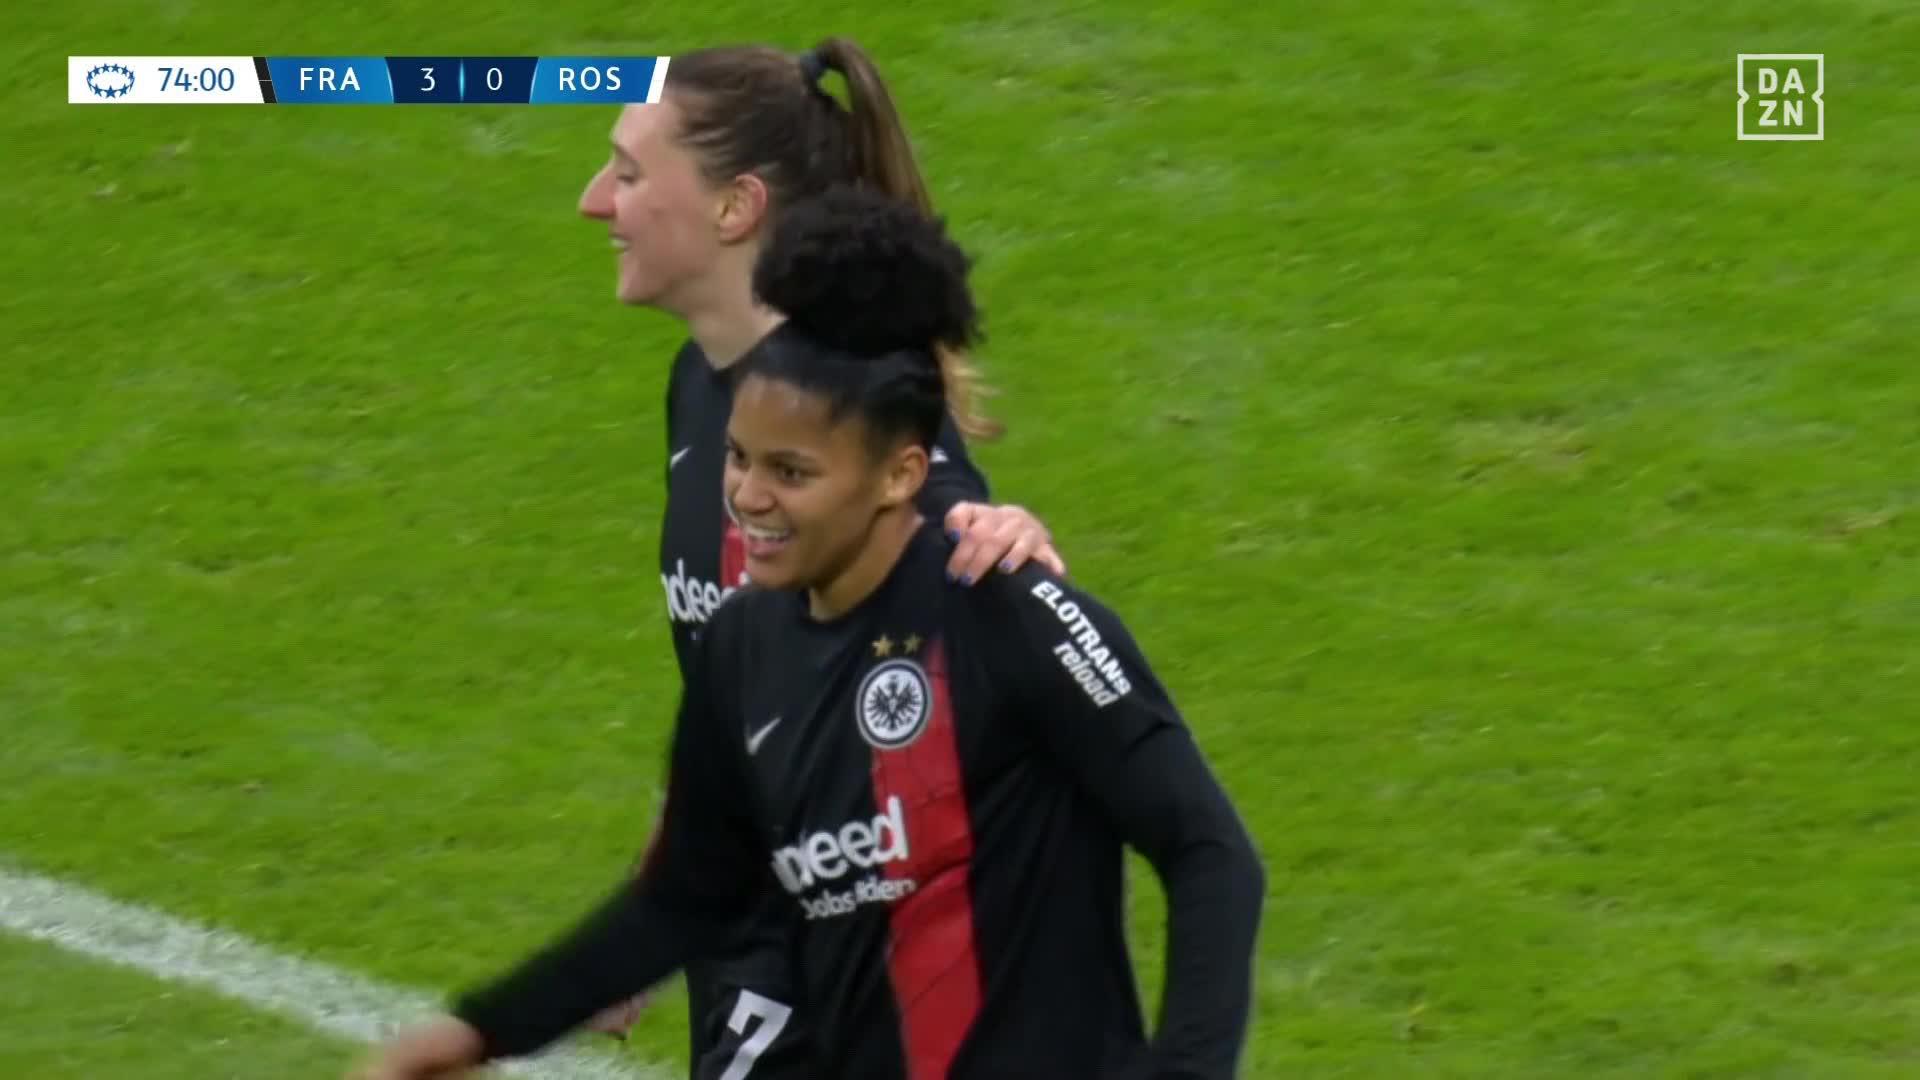 Front three are COOKING! Shekiera Martinez makes NO mistake. 🤝Watch the UWCL LIVE for FREE on DAZN 👉  #UWCLonDAZN